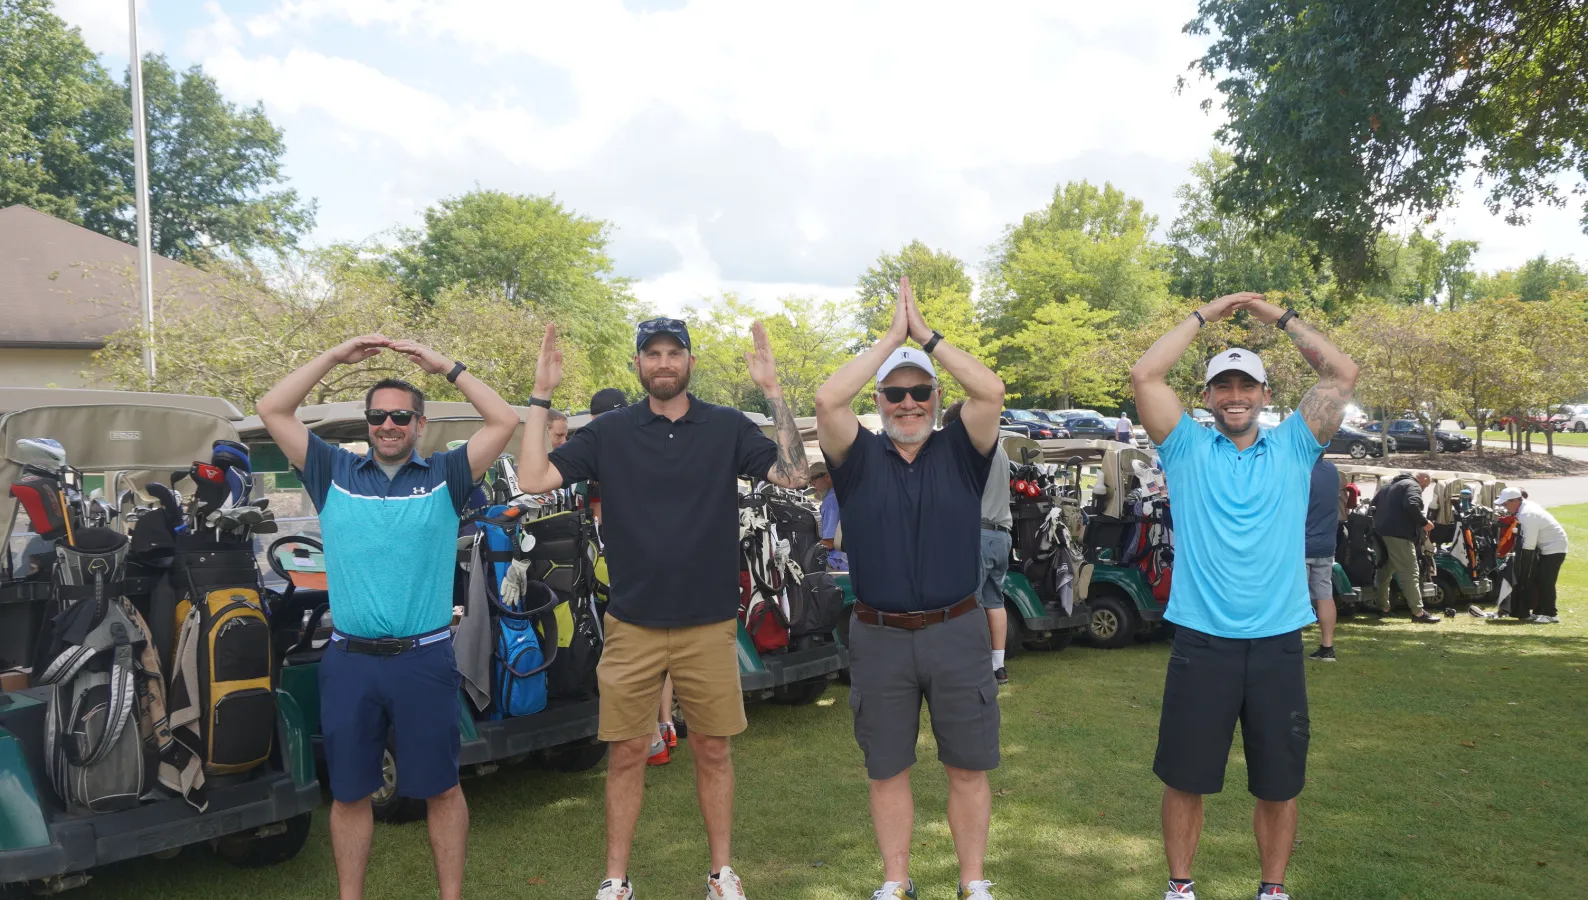 golfers spelling ohio with their arms